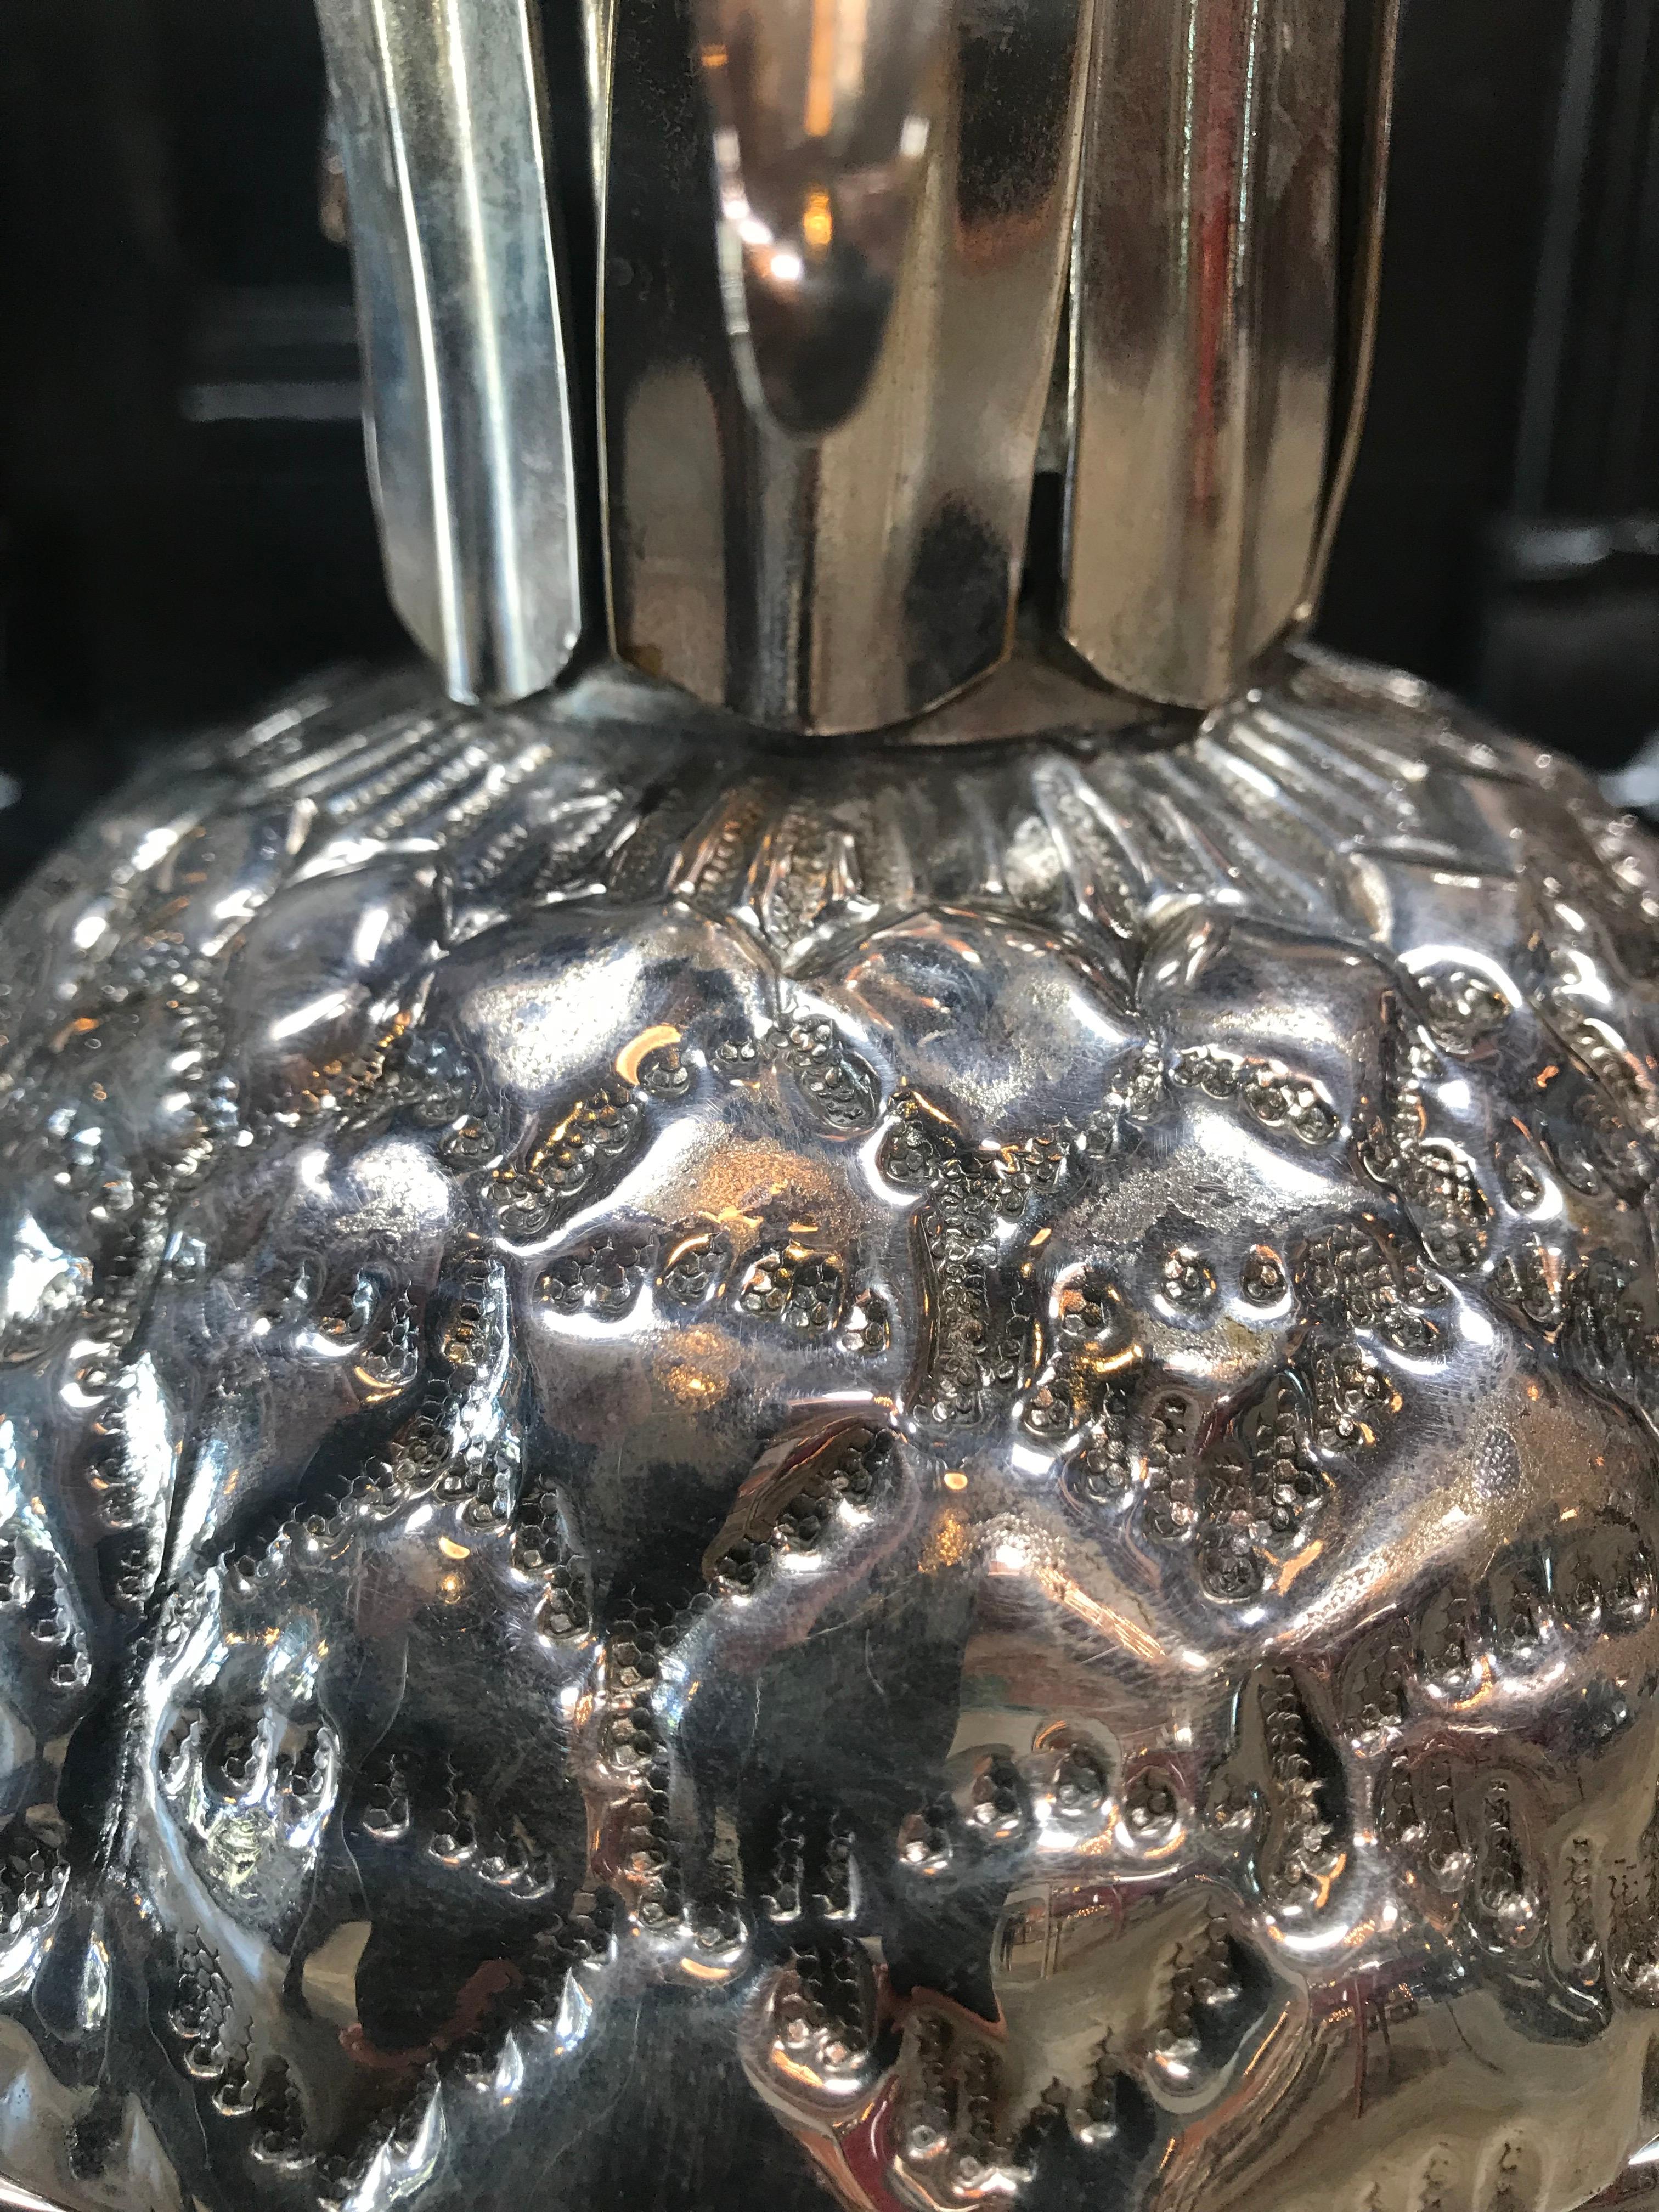 Italian Silver Plated Pineapple Ice Bucket Made in Florence, Italy by Teghini